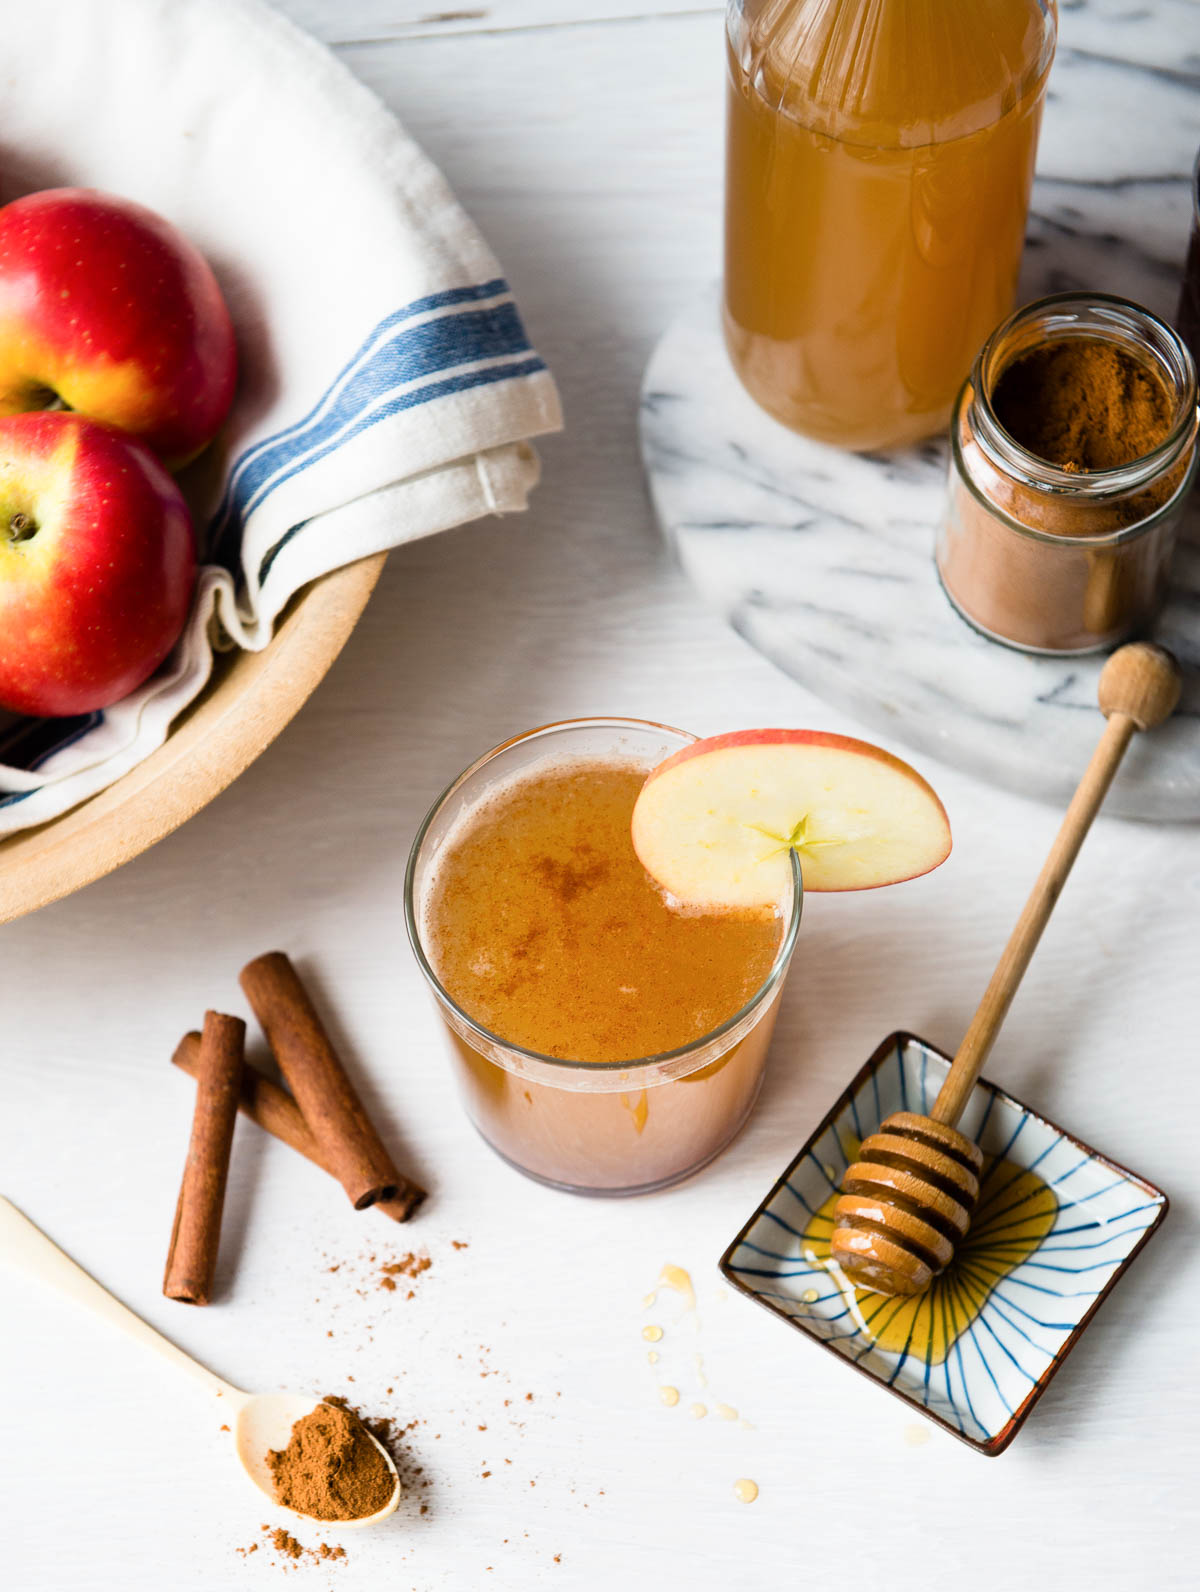 apple cider vinegar drink in a short glass with a apple slice garnish next to a honey comb, cinnamon sticks and a teaspoon of cinnamon.